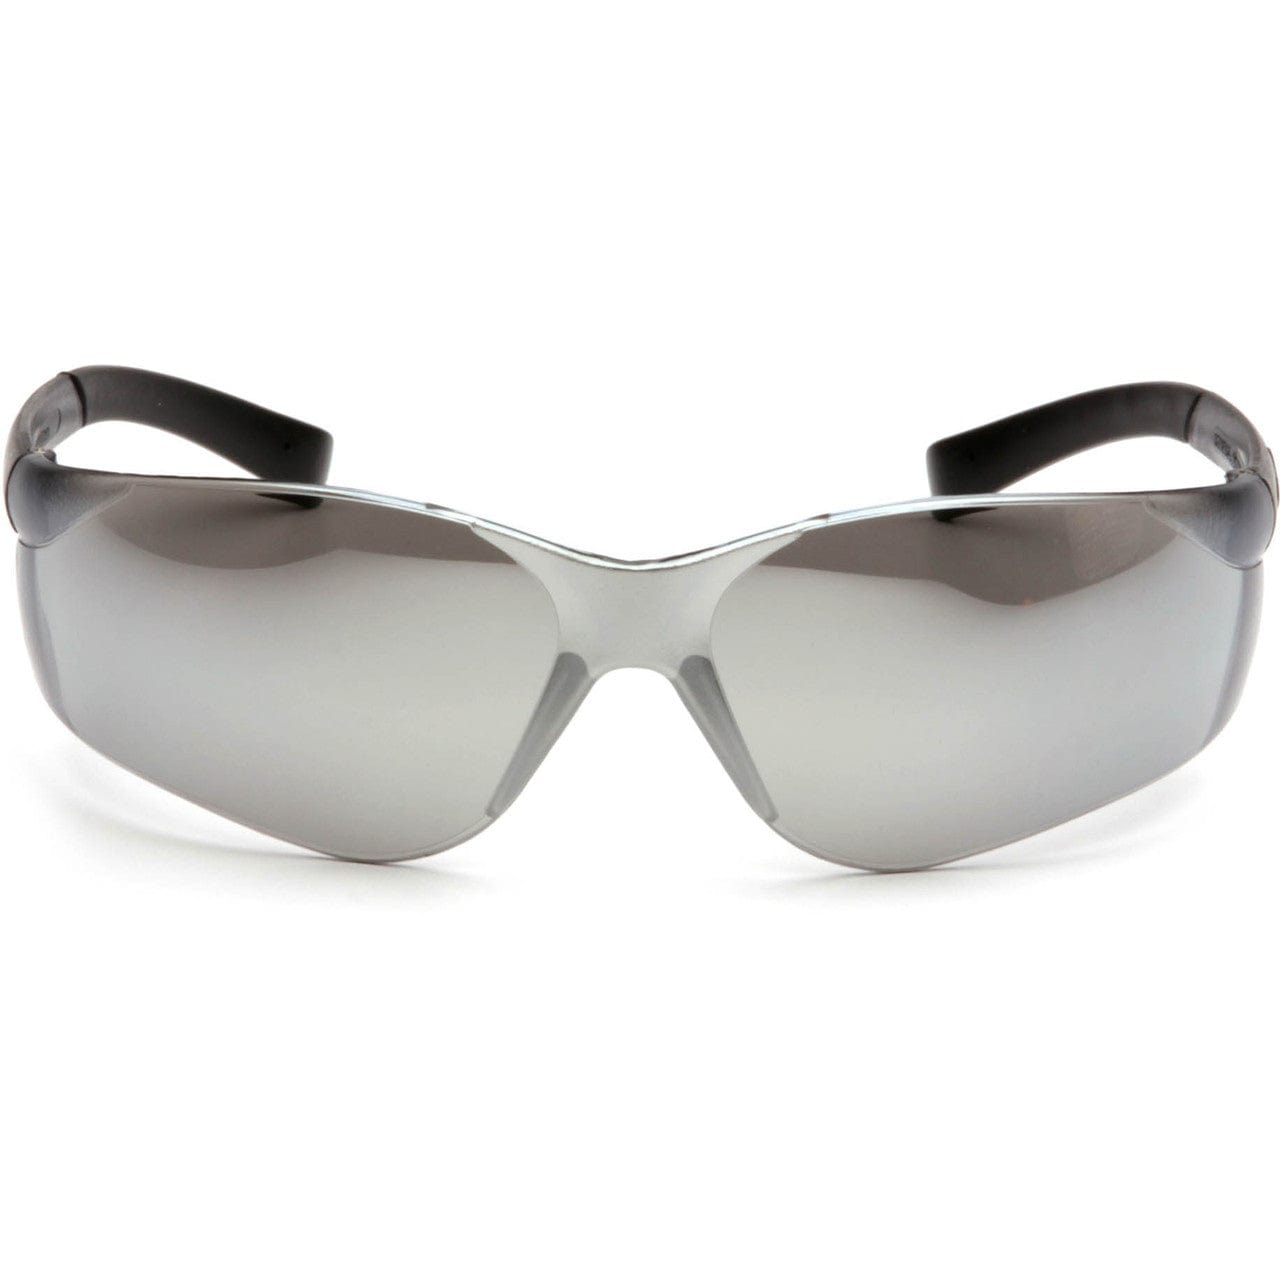 Pyramex Ztek Safety Glasses with Silver Mirror Lens S2570S Front View